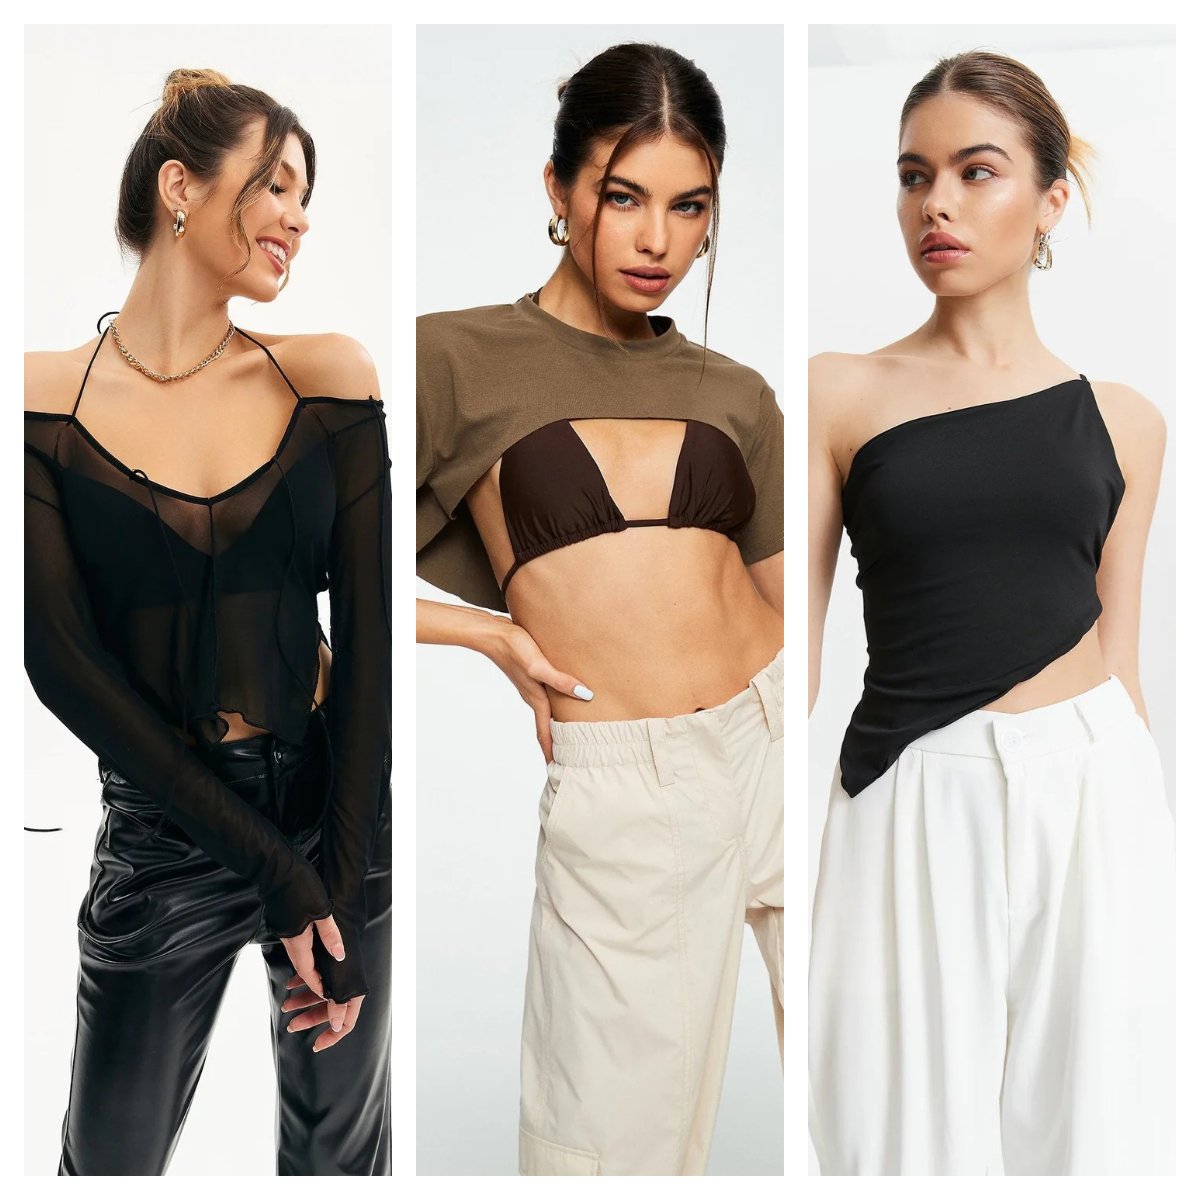 https://stratus.campaign-image.com/images/1191257000000943004_zc_v1_1704640729457_solado_tie_front_ruffle_flared_sleeve_chiffon_crop_(1).jpg